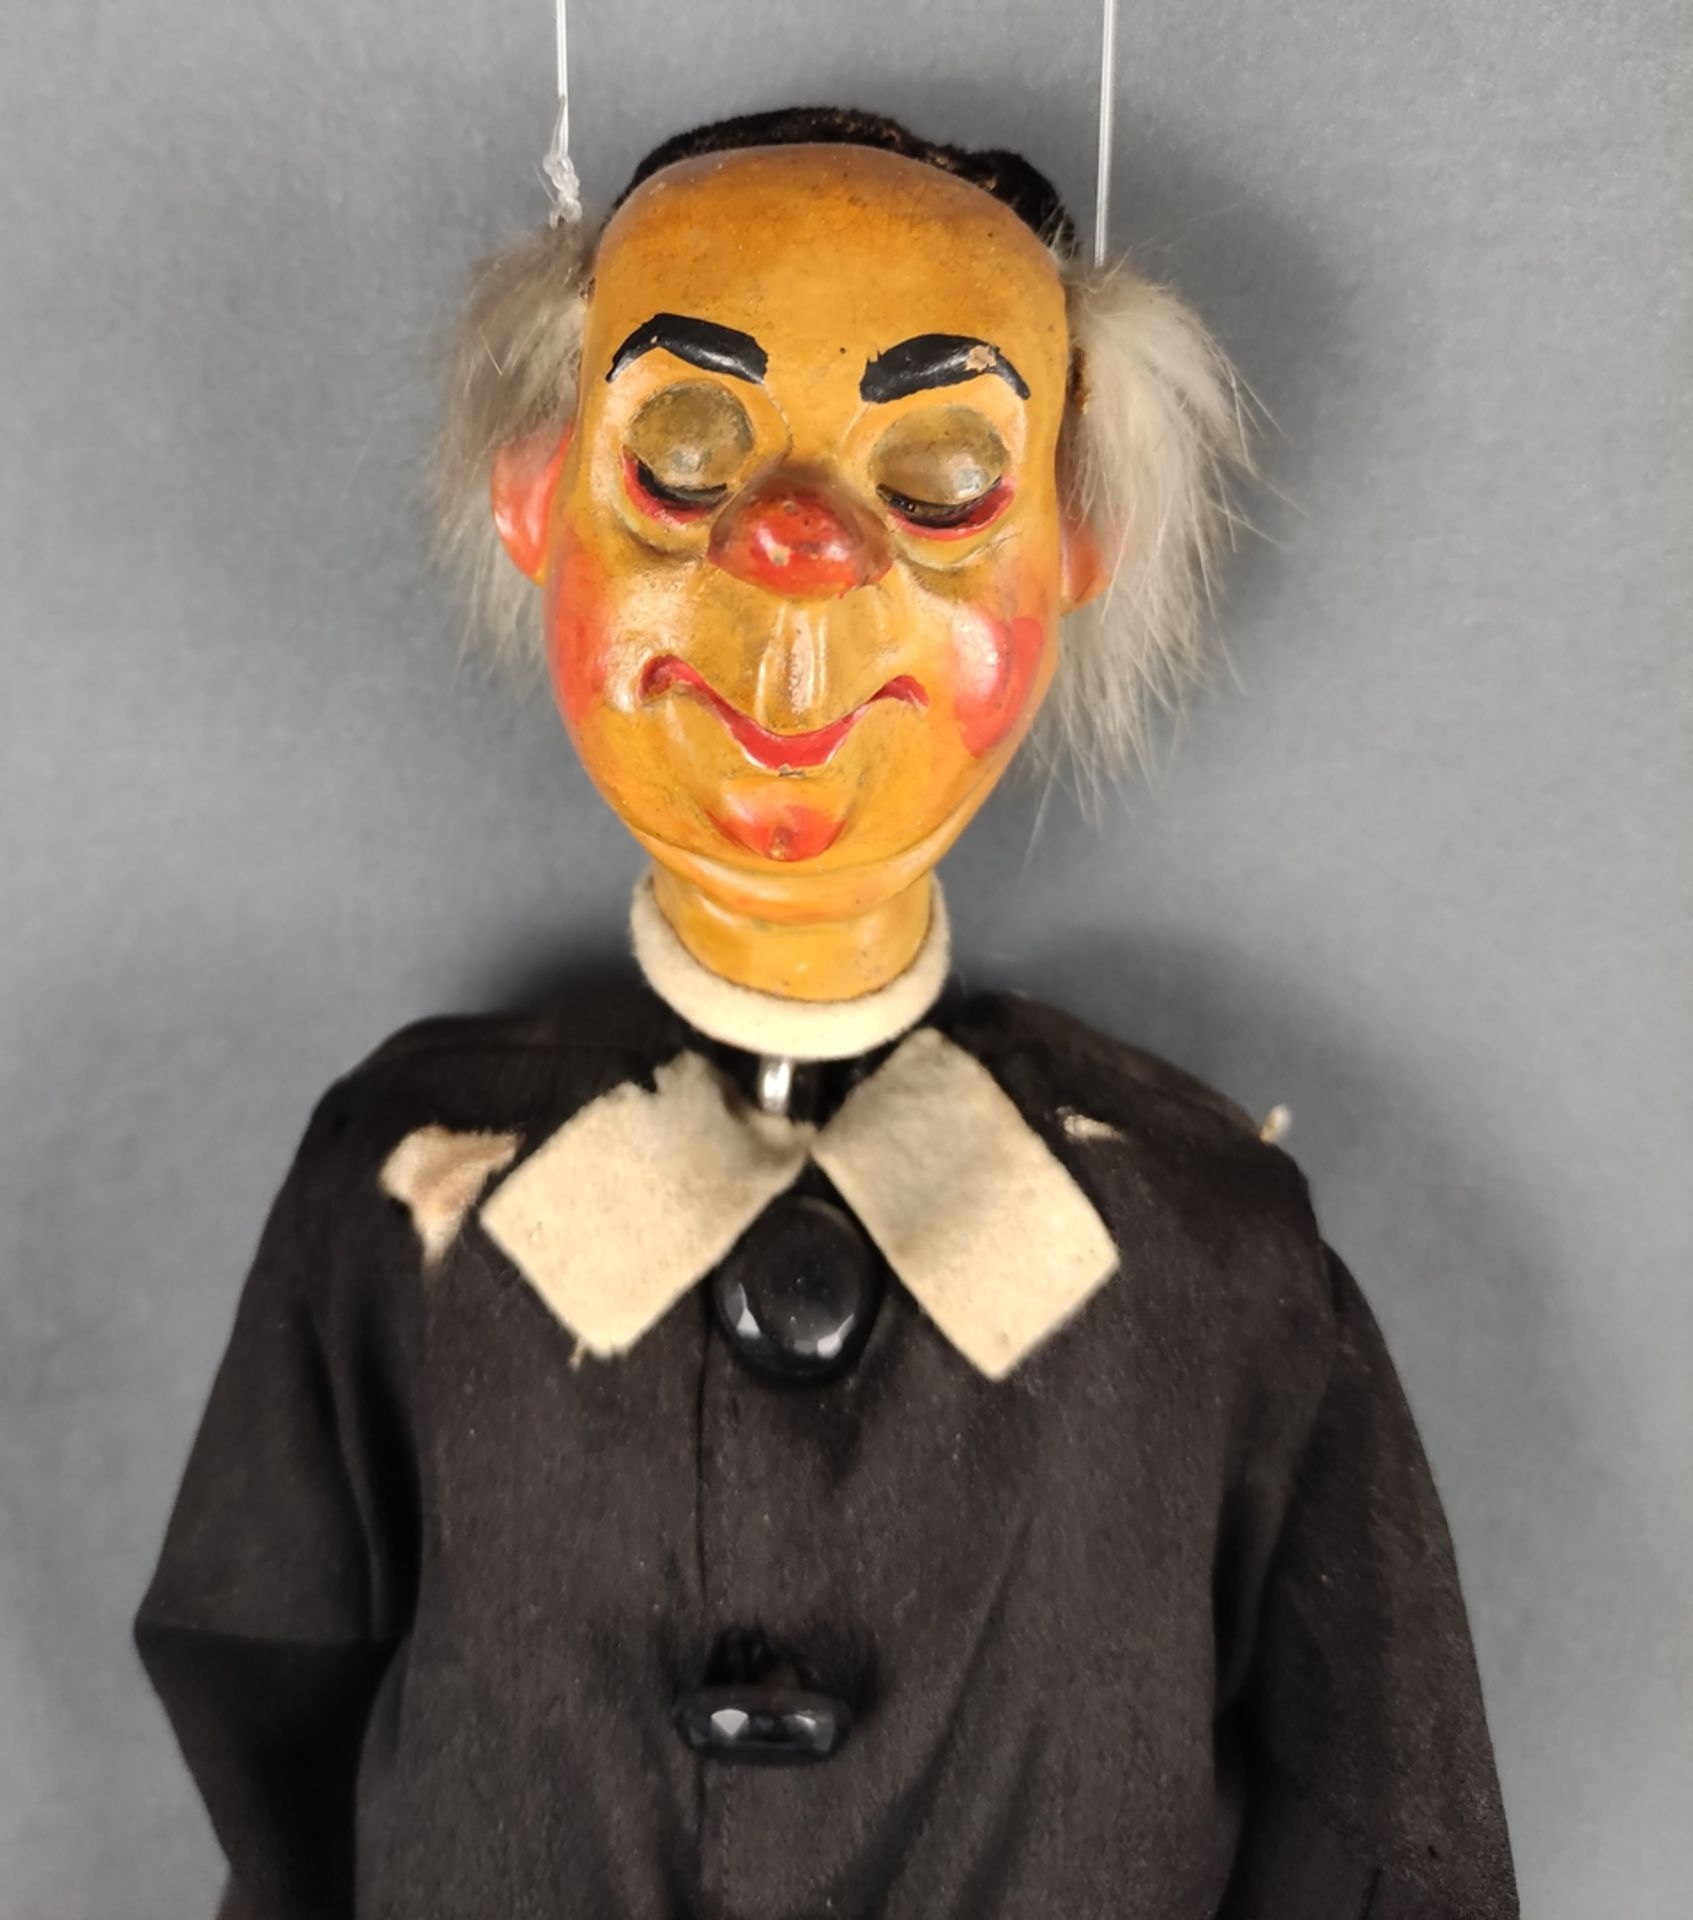 Puppet from the puppet theatre "Priest", polychrome painted ceramic, grey hair wreath made of rabbi - Image 3 of 6